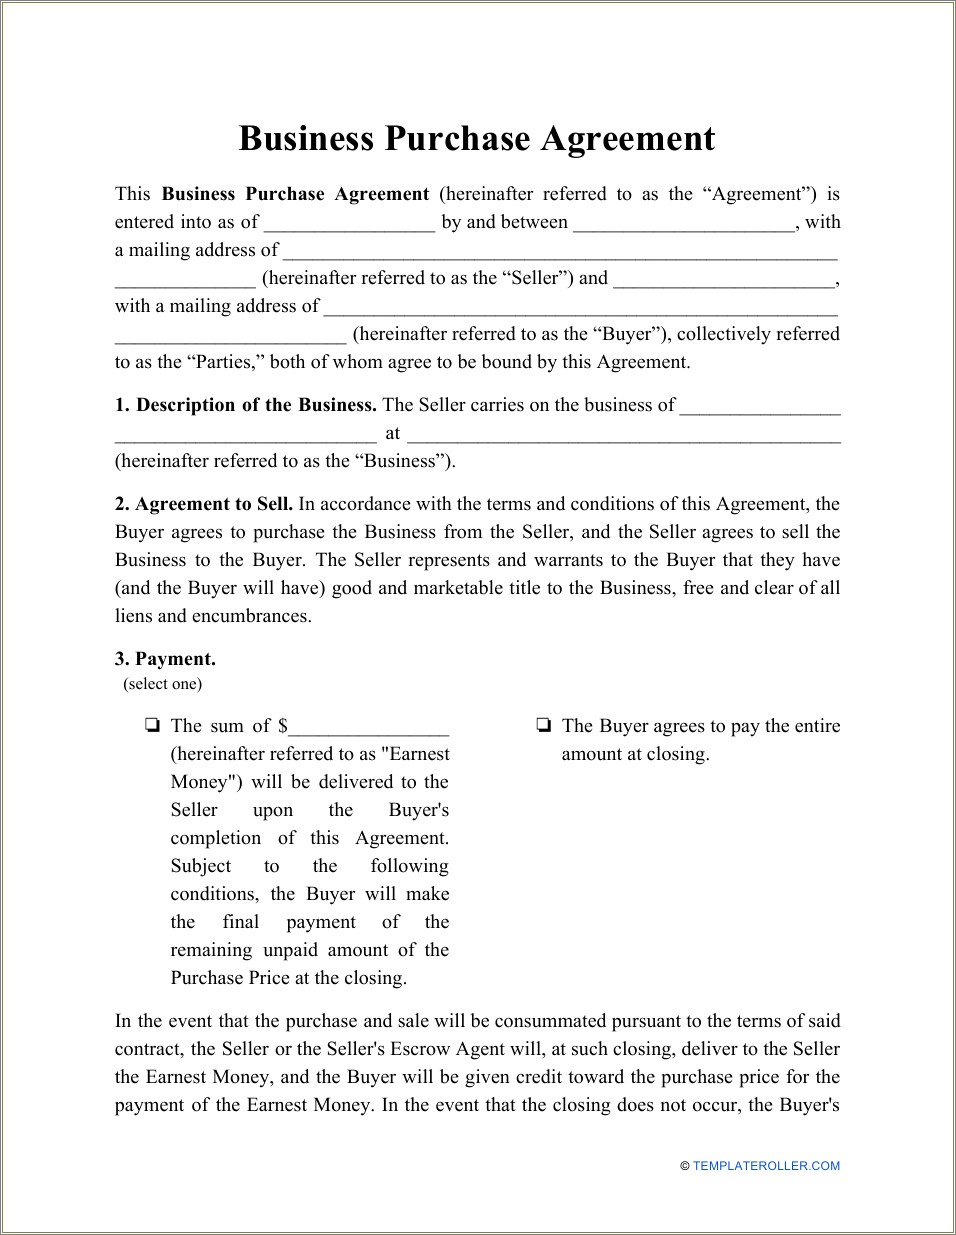 Consulting Business Purchase Agreement Template Free